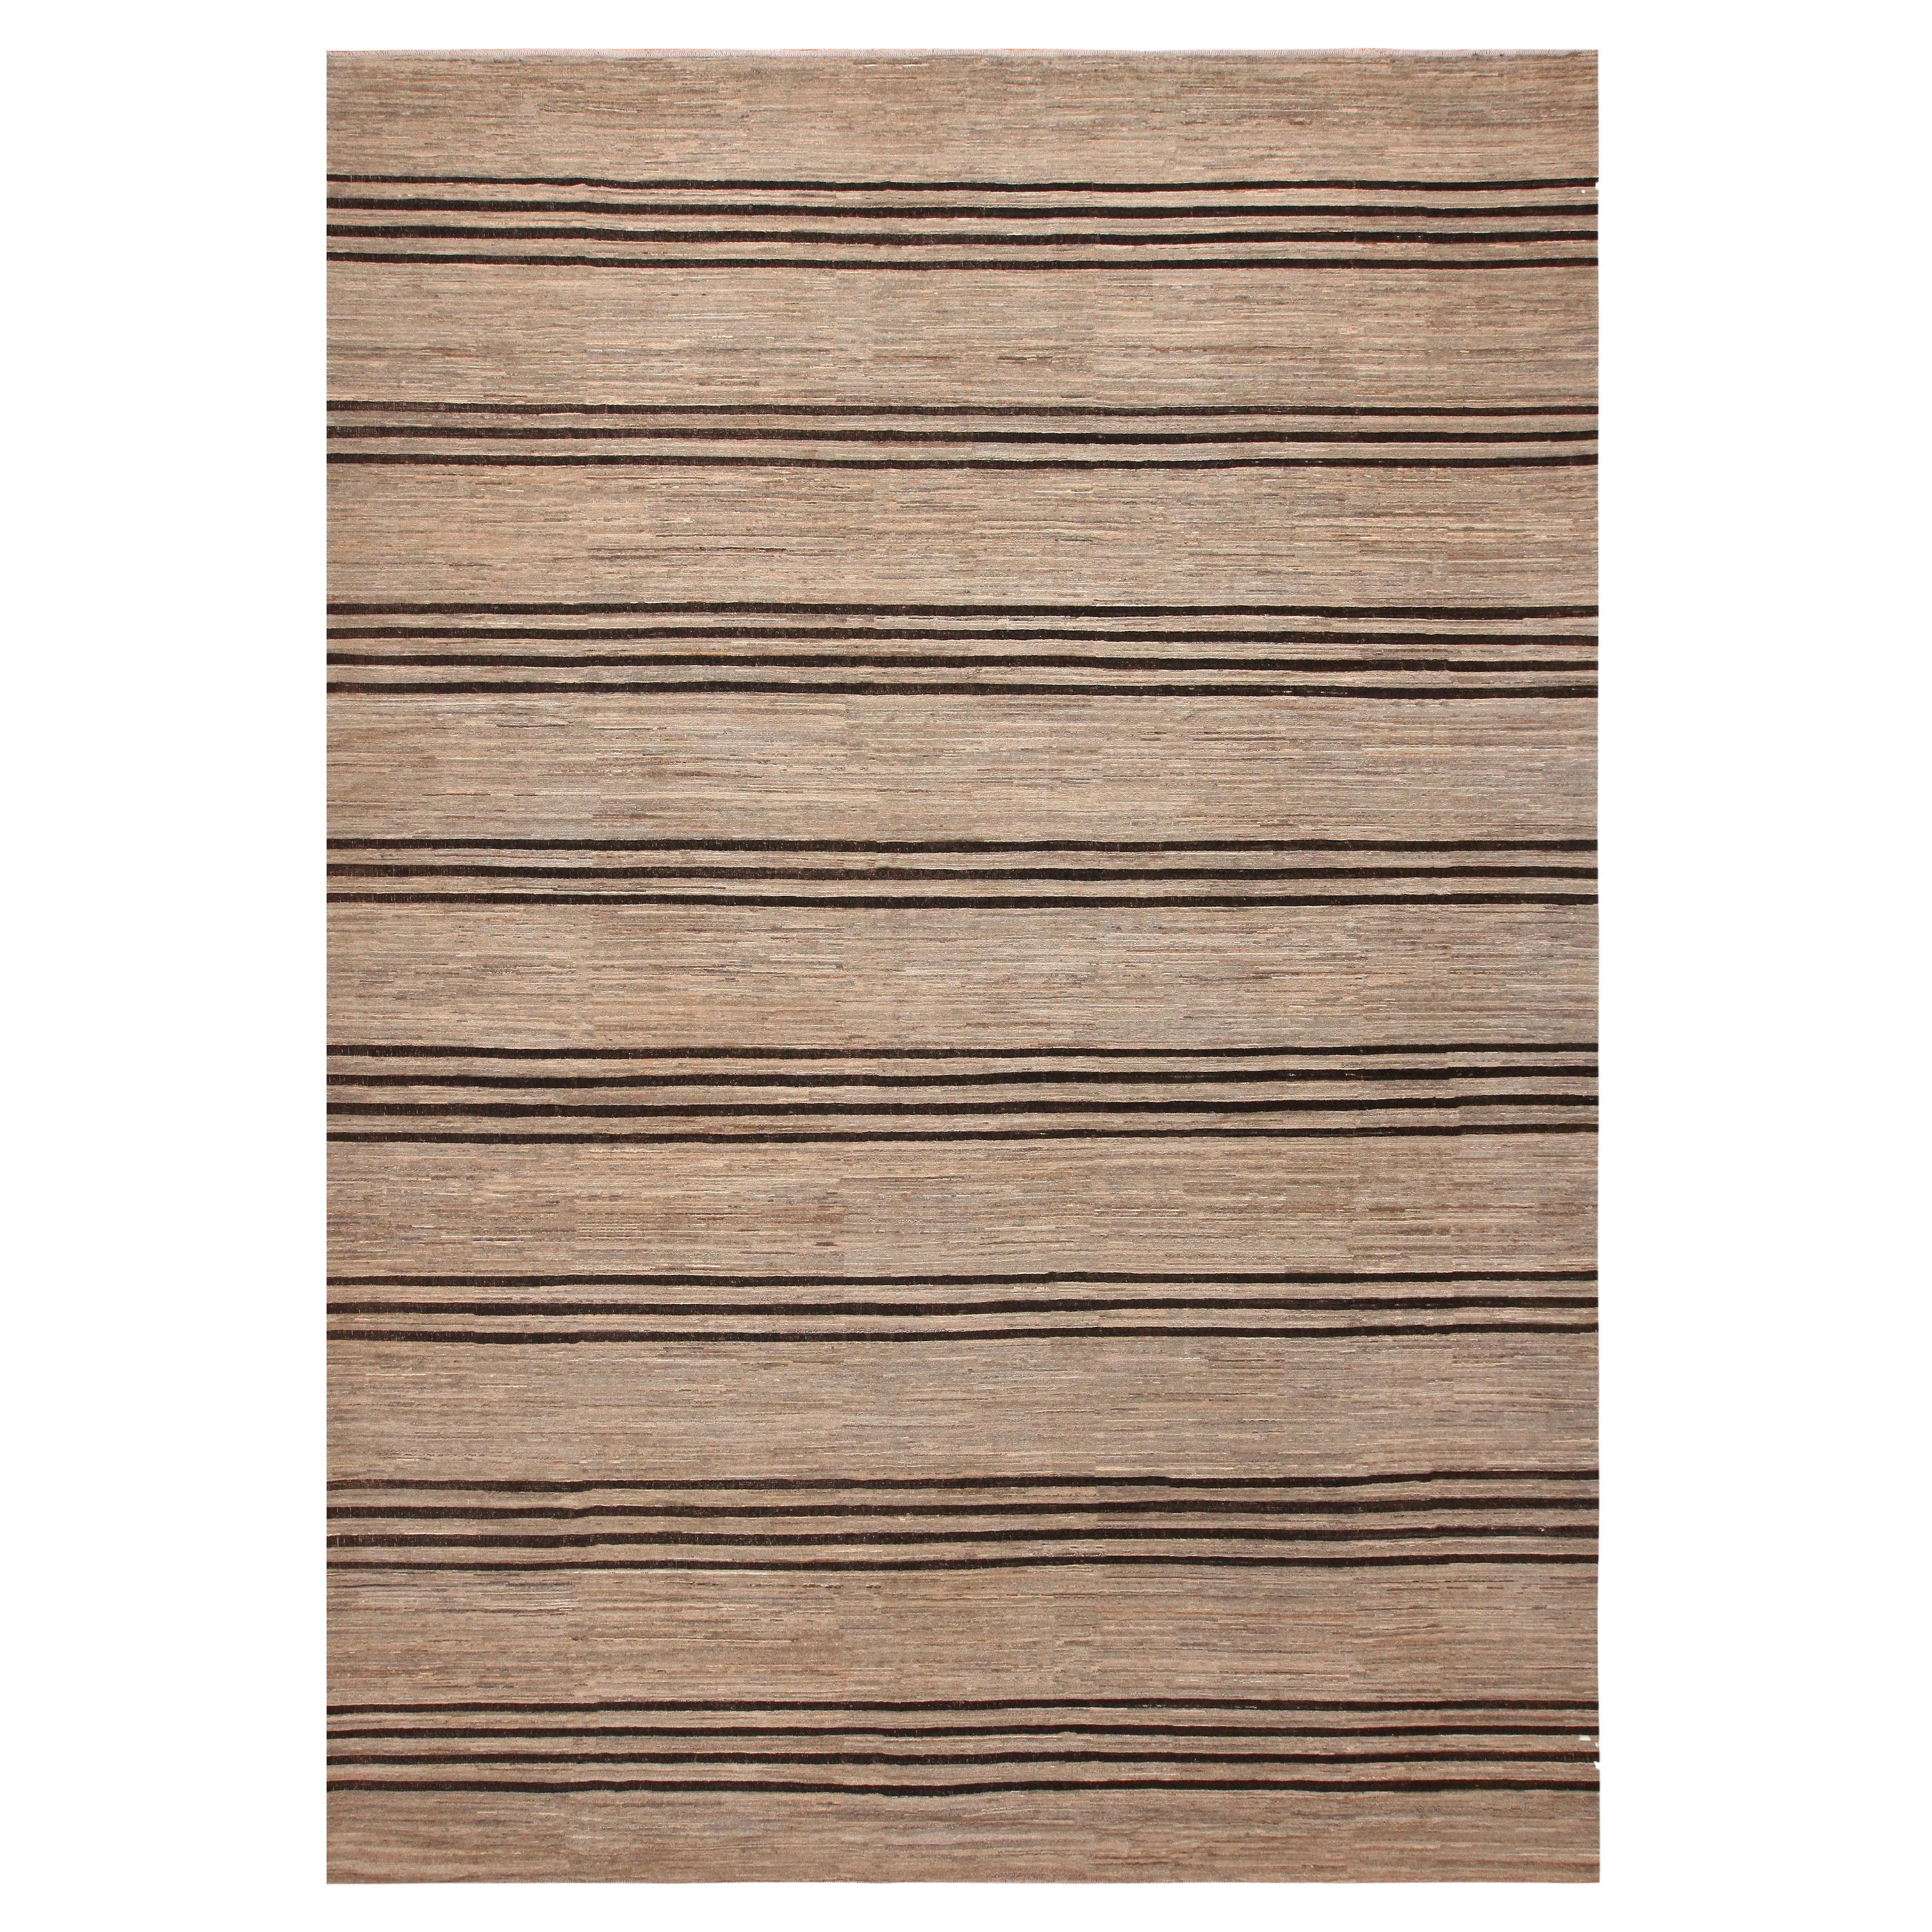 Nazmiyal Collection Large Earthy Tones Decorative Modern Rug 13'5" x 18'11" For Sale